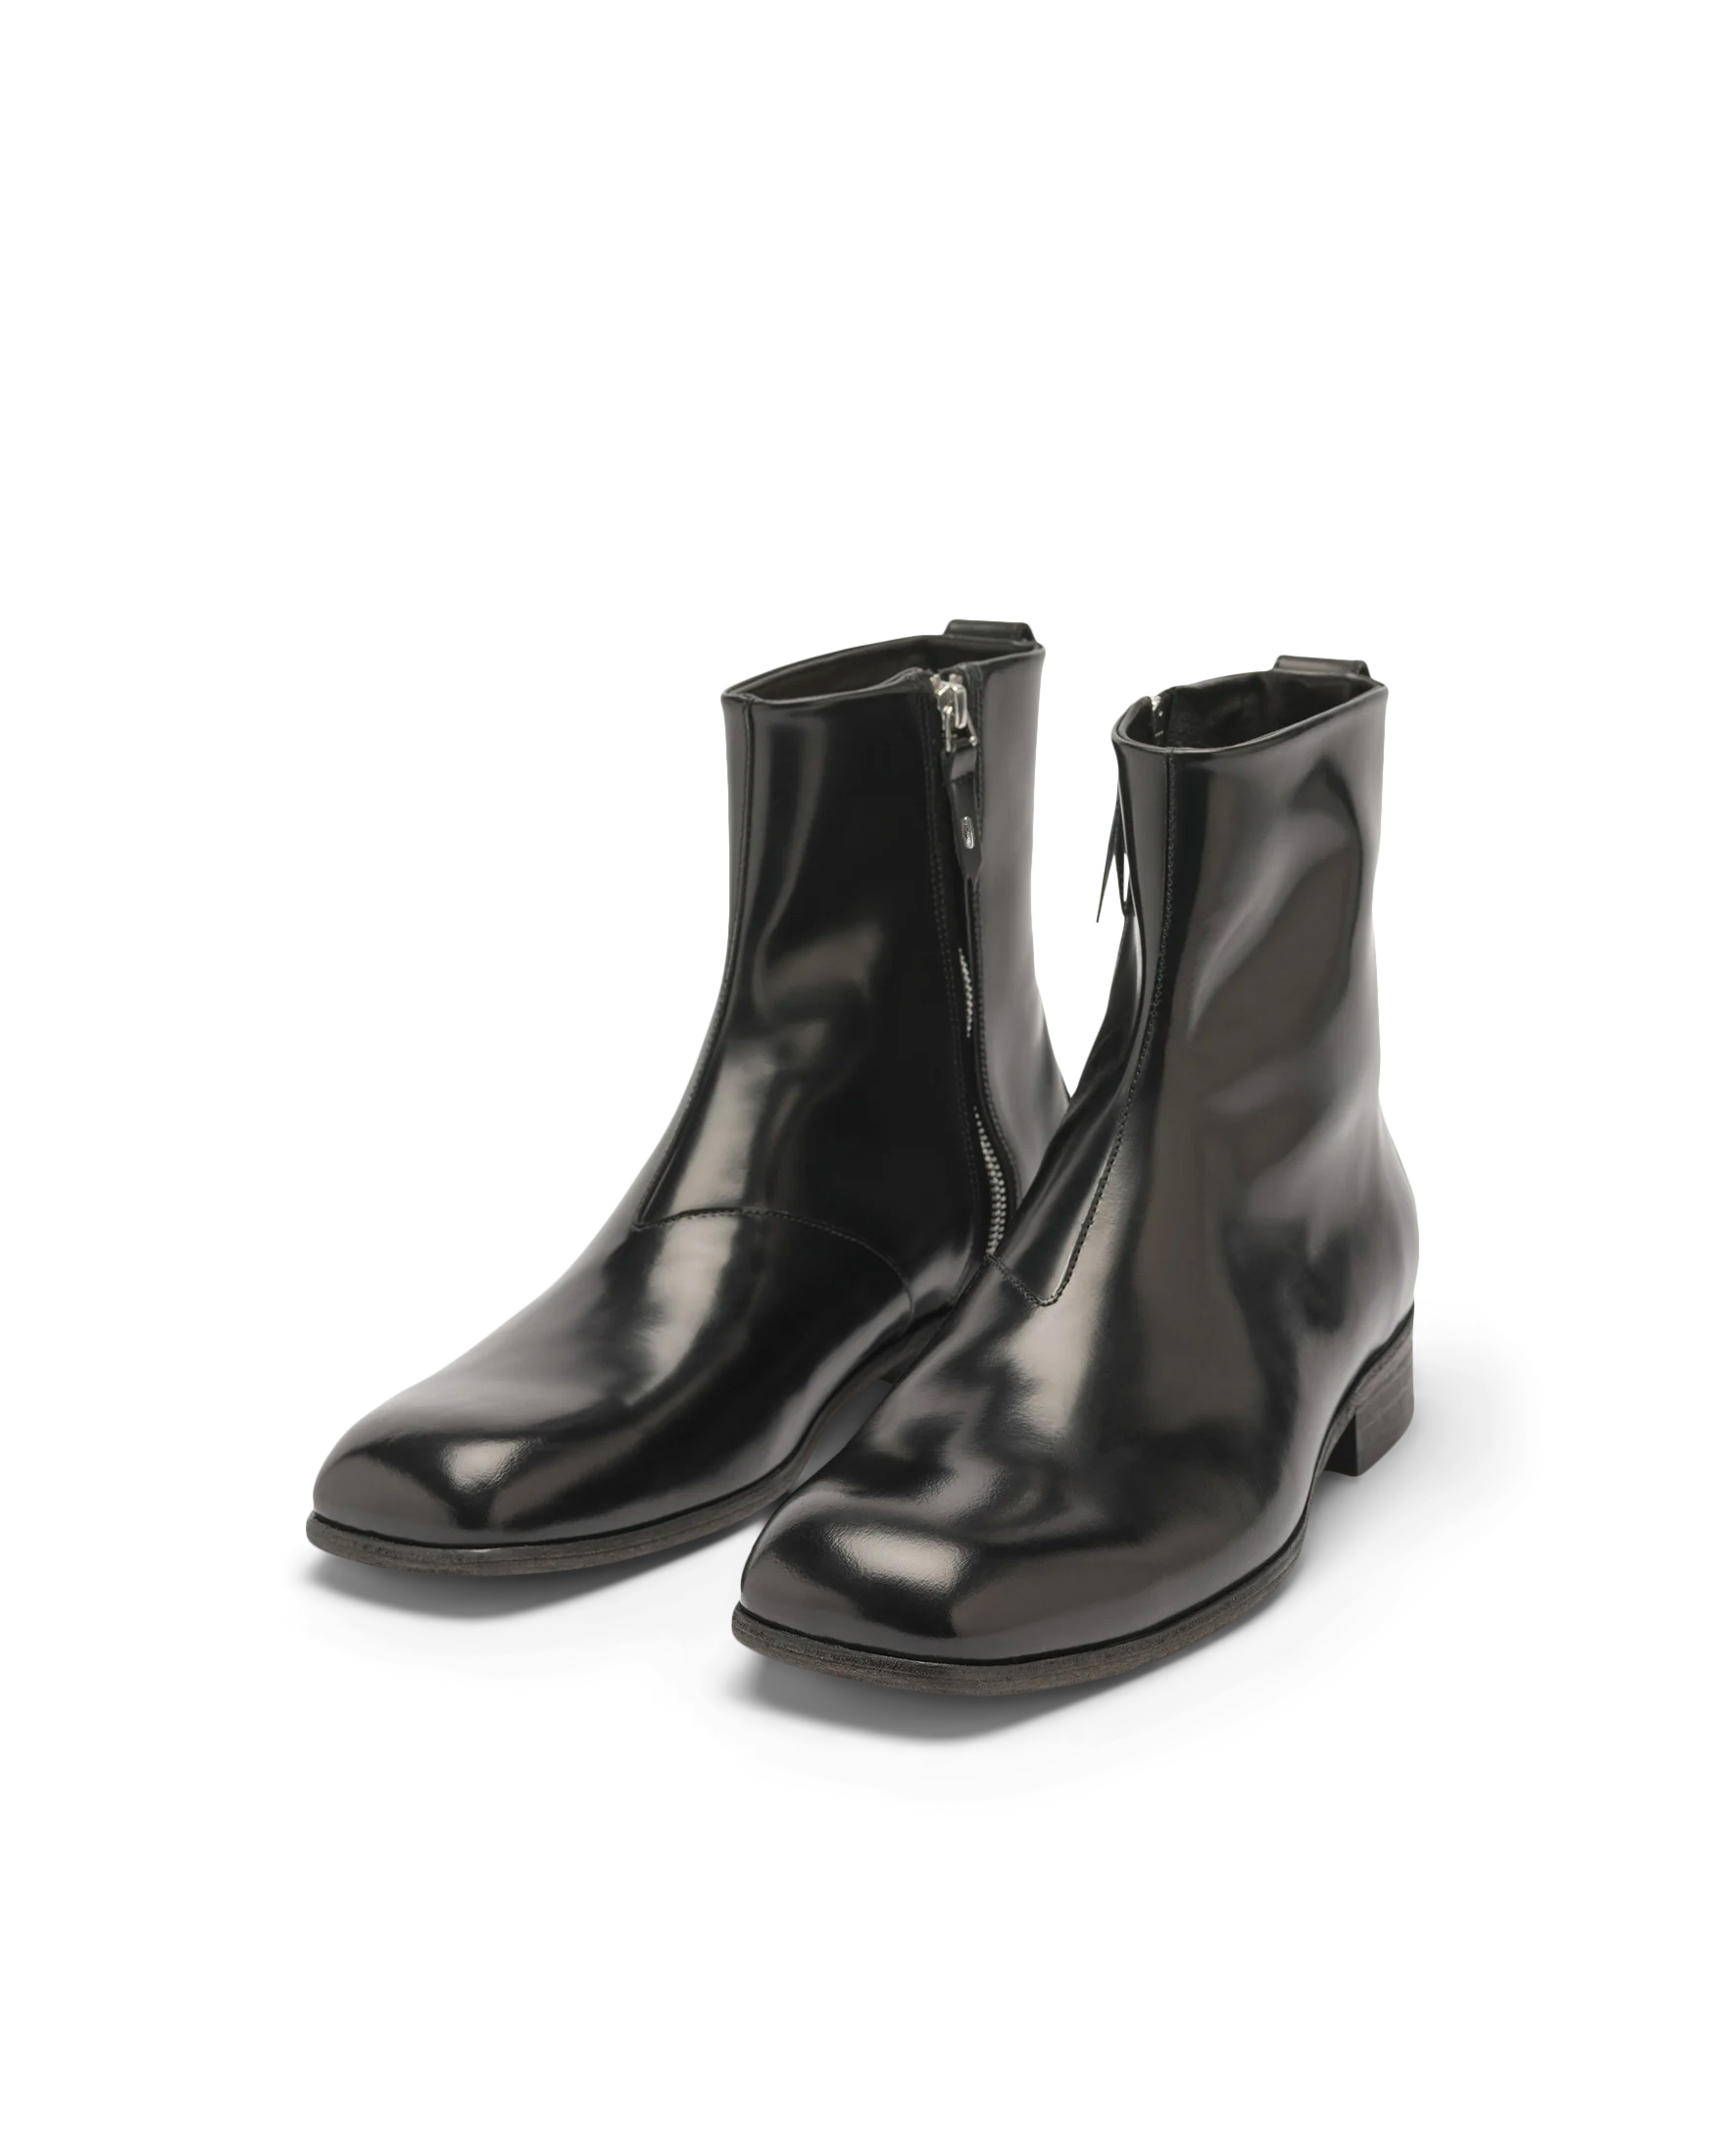 Michaelis Boot Our Legacy Footwear Boots Black